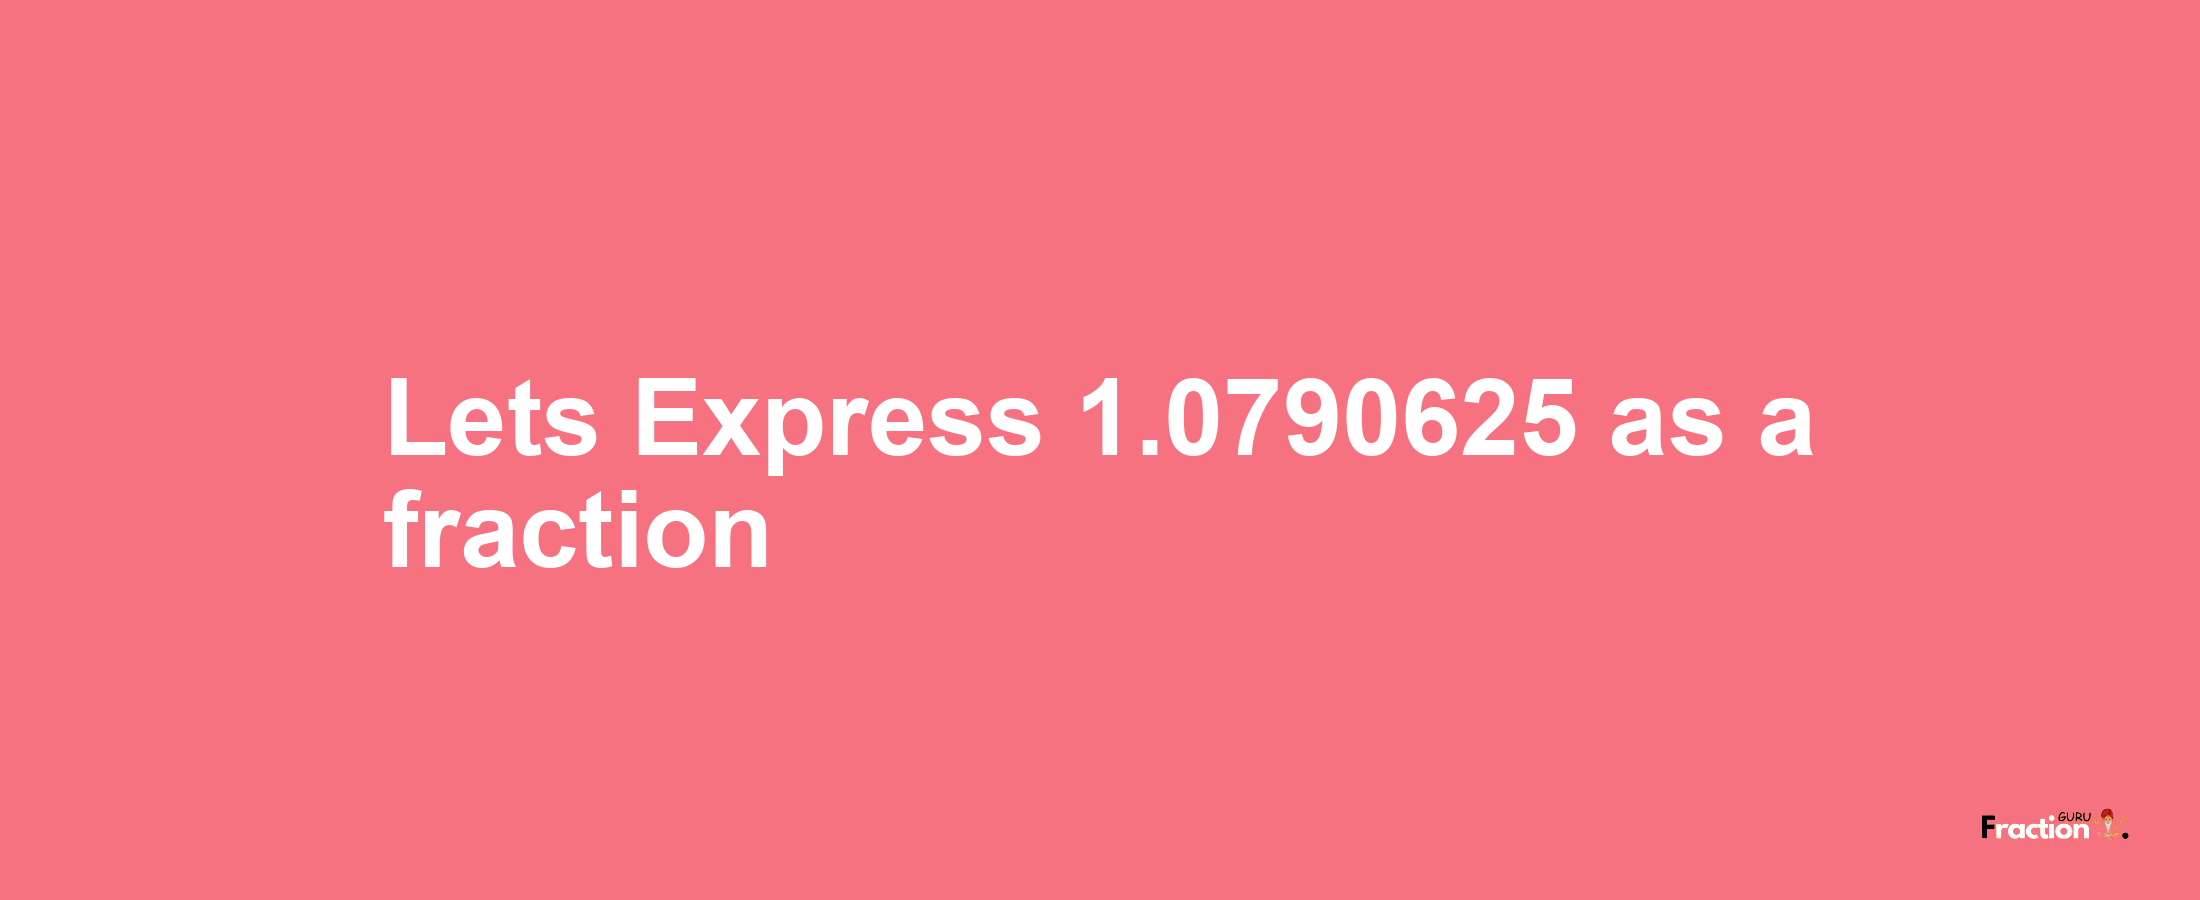 Lets Express 1.0790625 as afraction